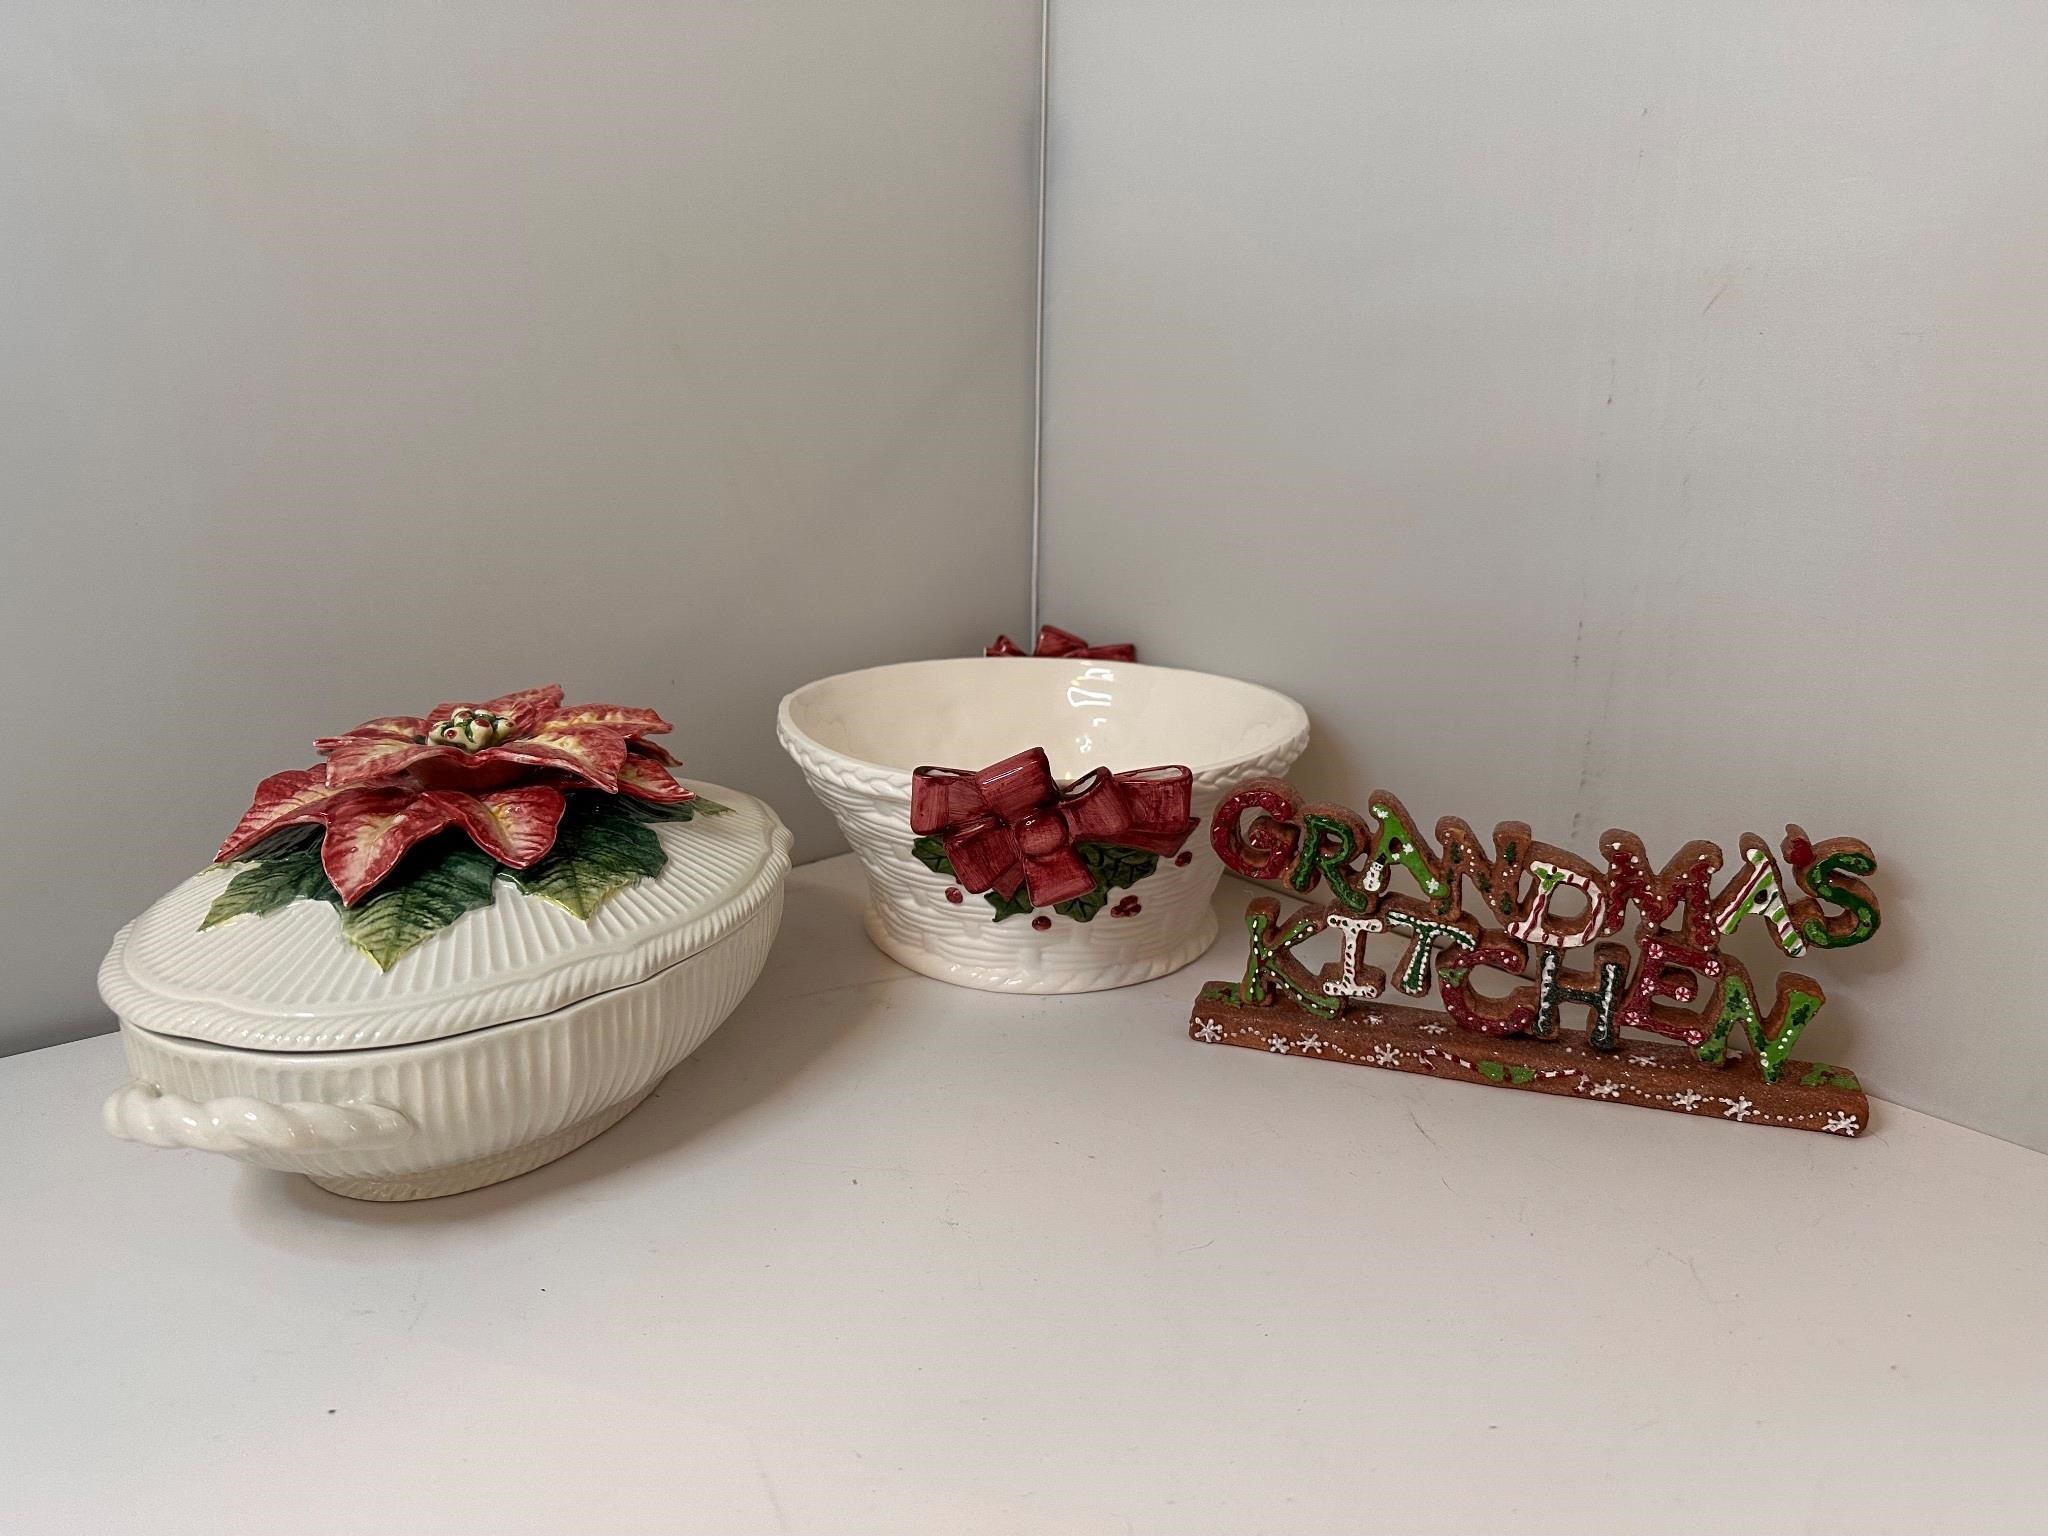 Fitz and Floyd covered dish and decor bowl